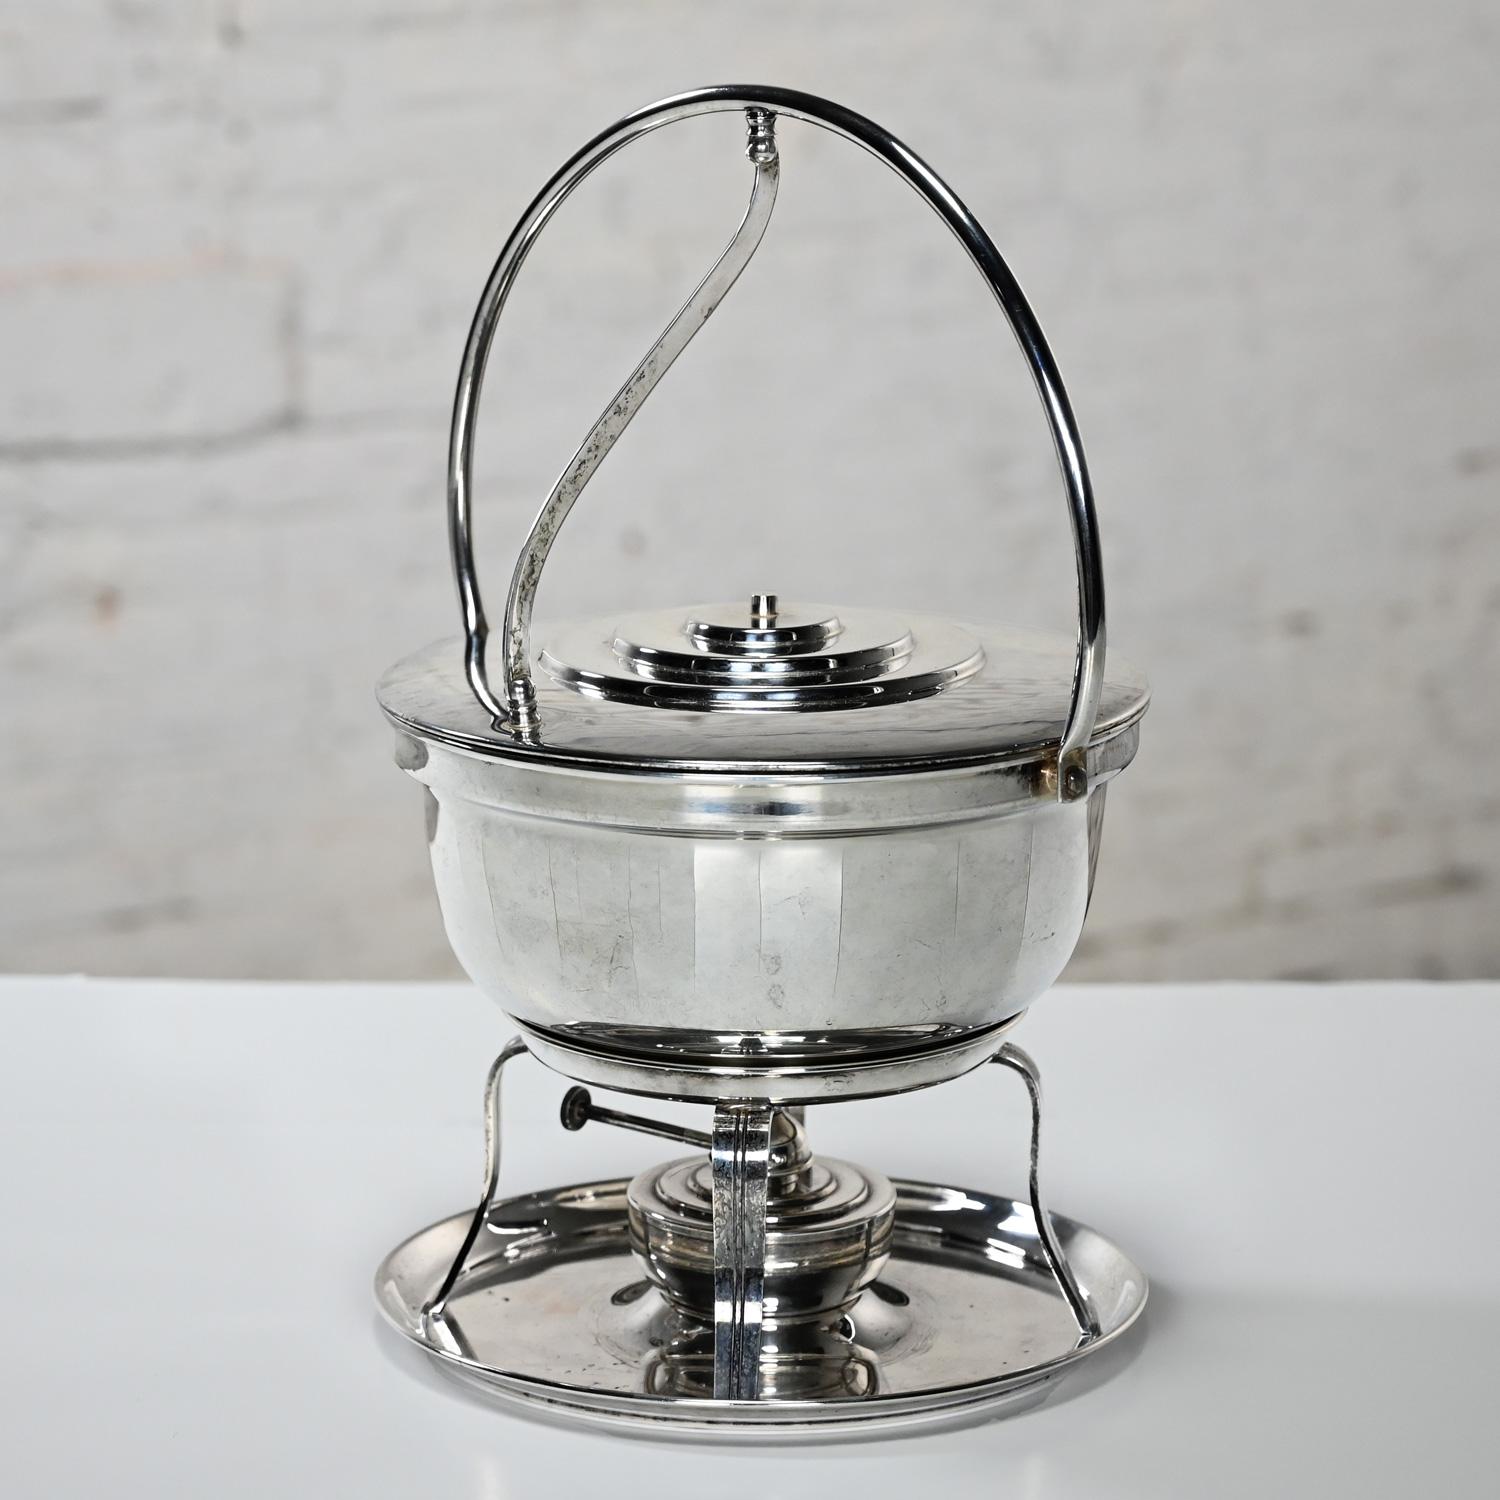 Art déco Art Deco Silver-Plated Chafing Dish Buffet Set 5 Pieces by English Silver Mfg Co en vente